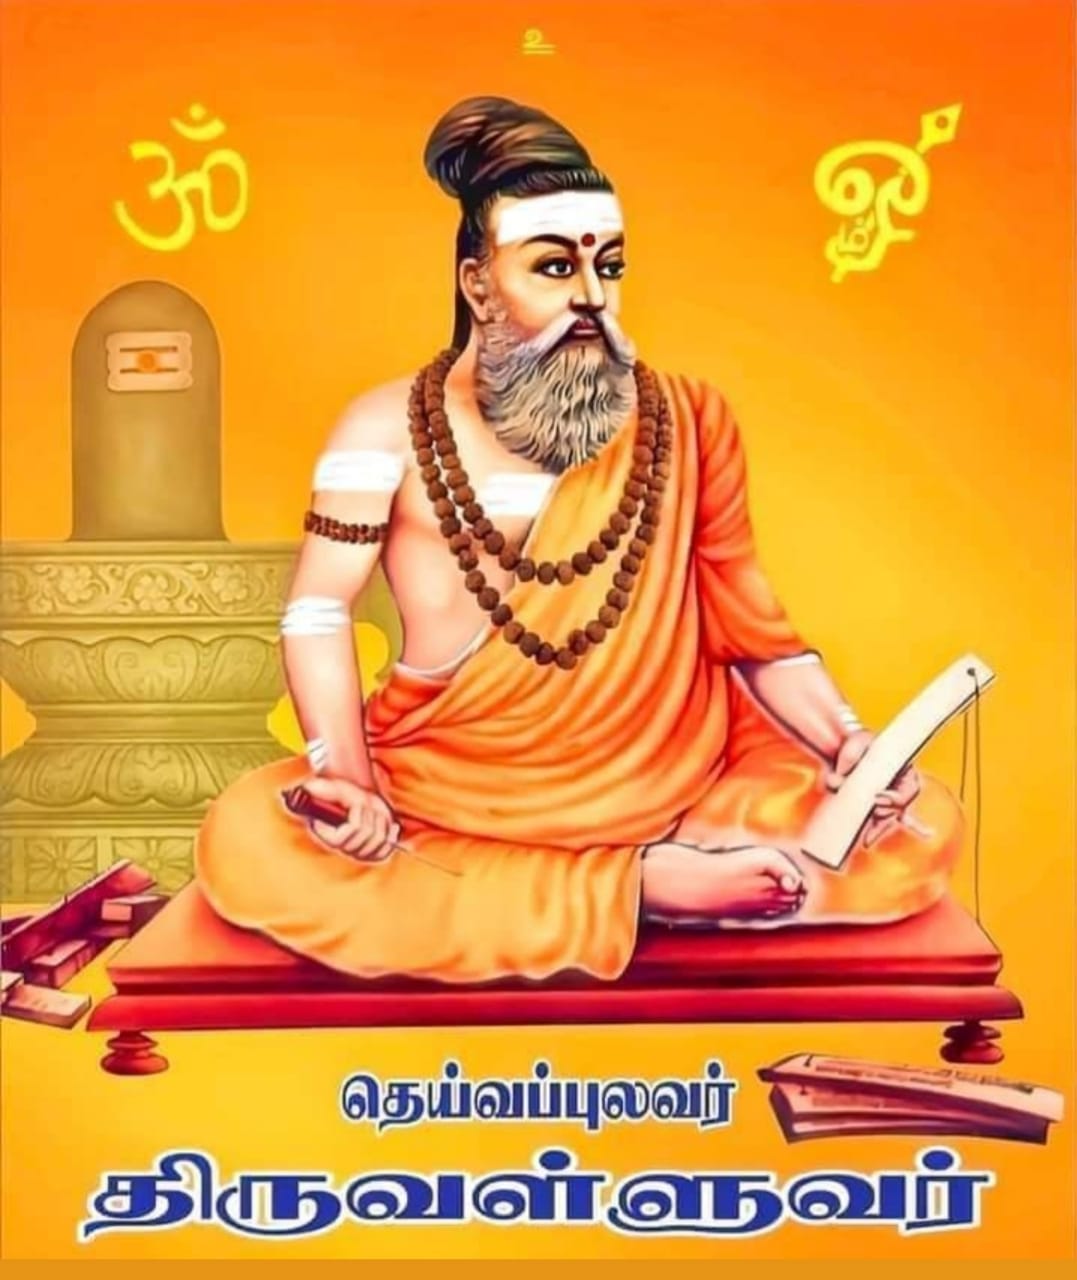 Thiruvalluvar and appropriation attempts by anti-Hindu forces - VSK